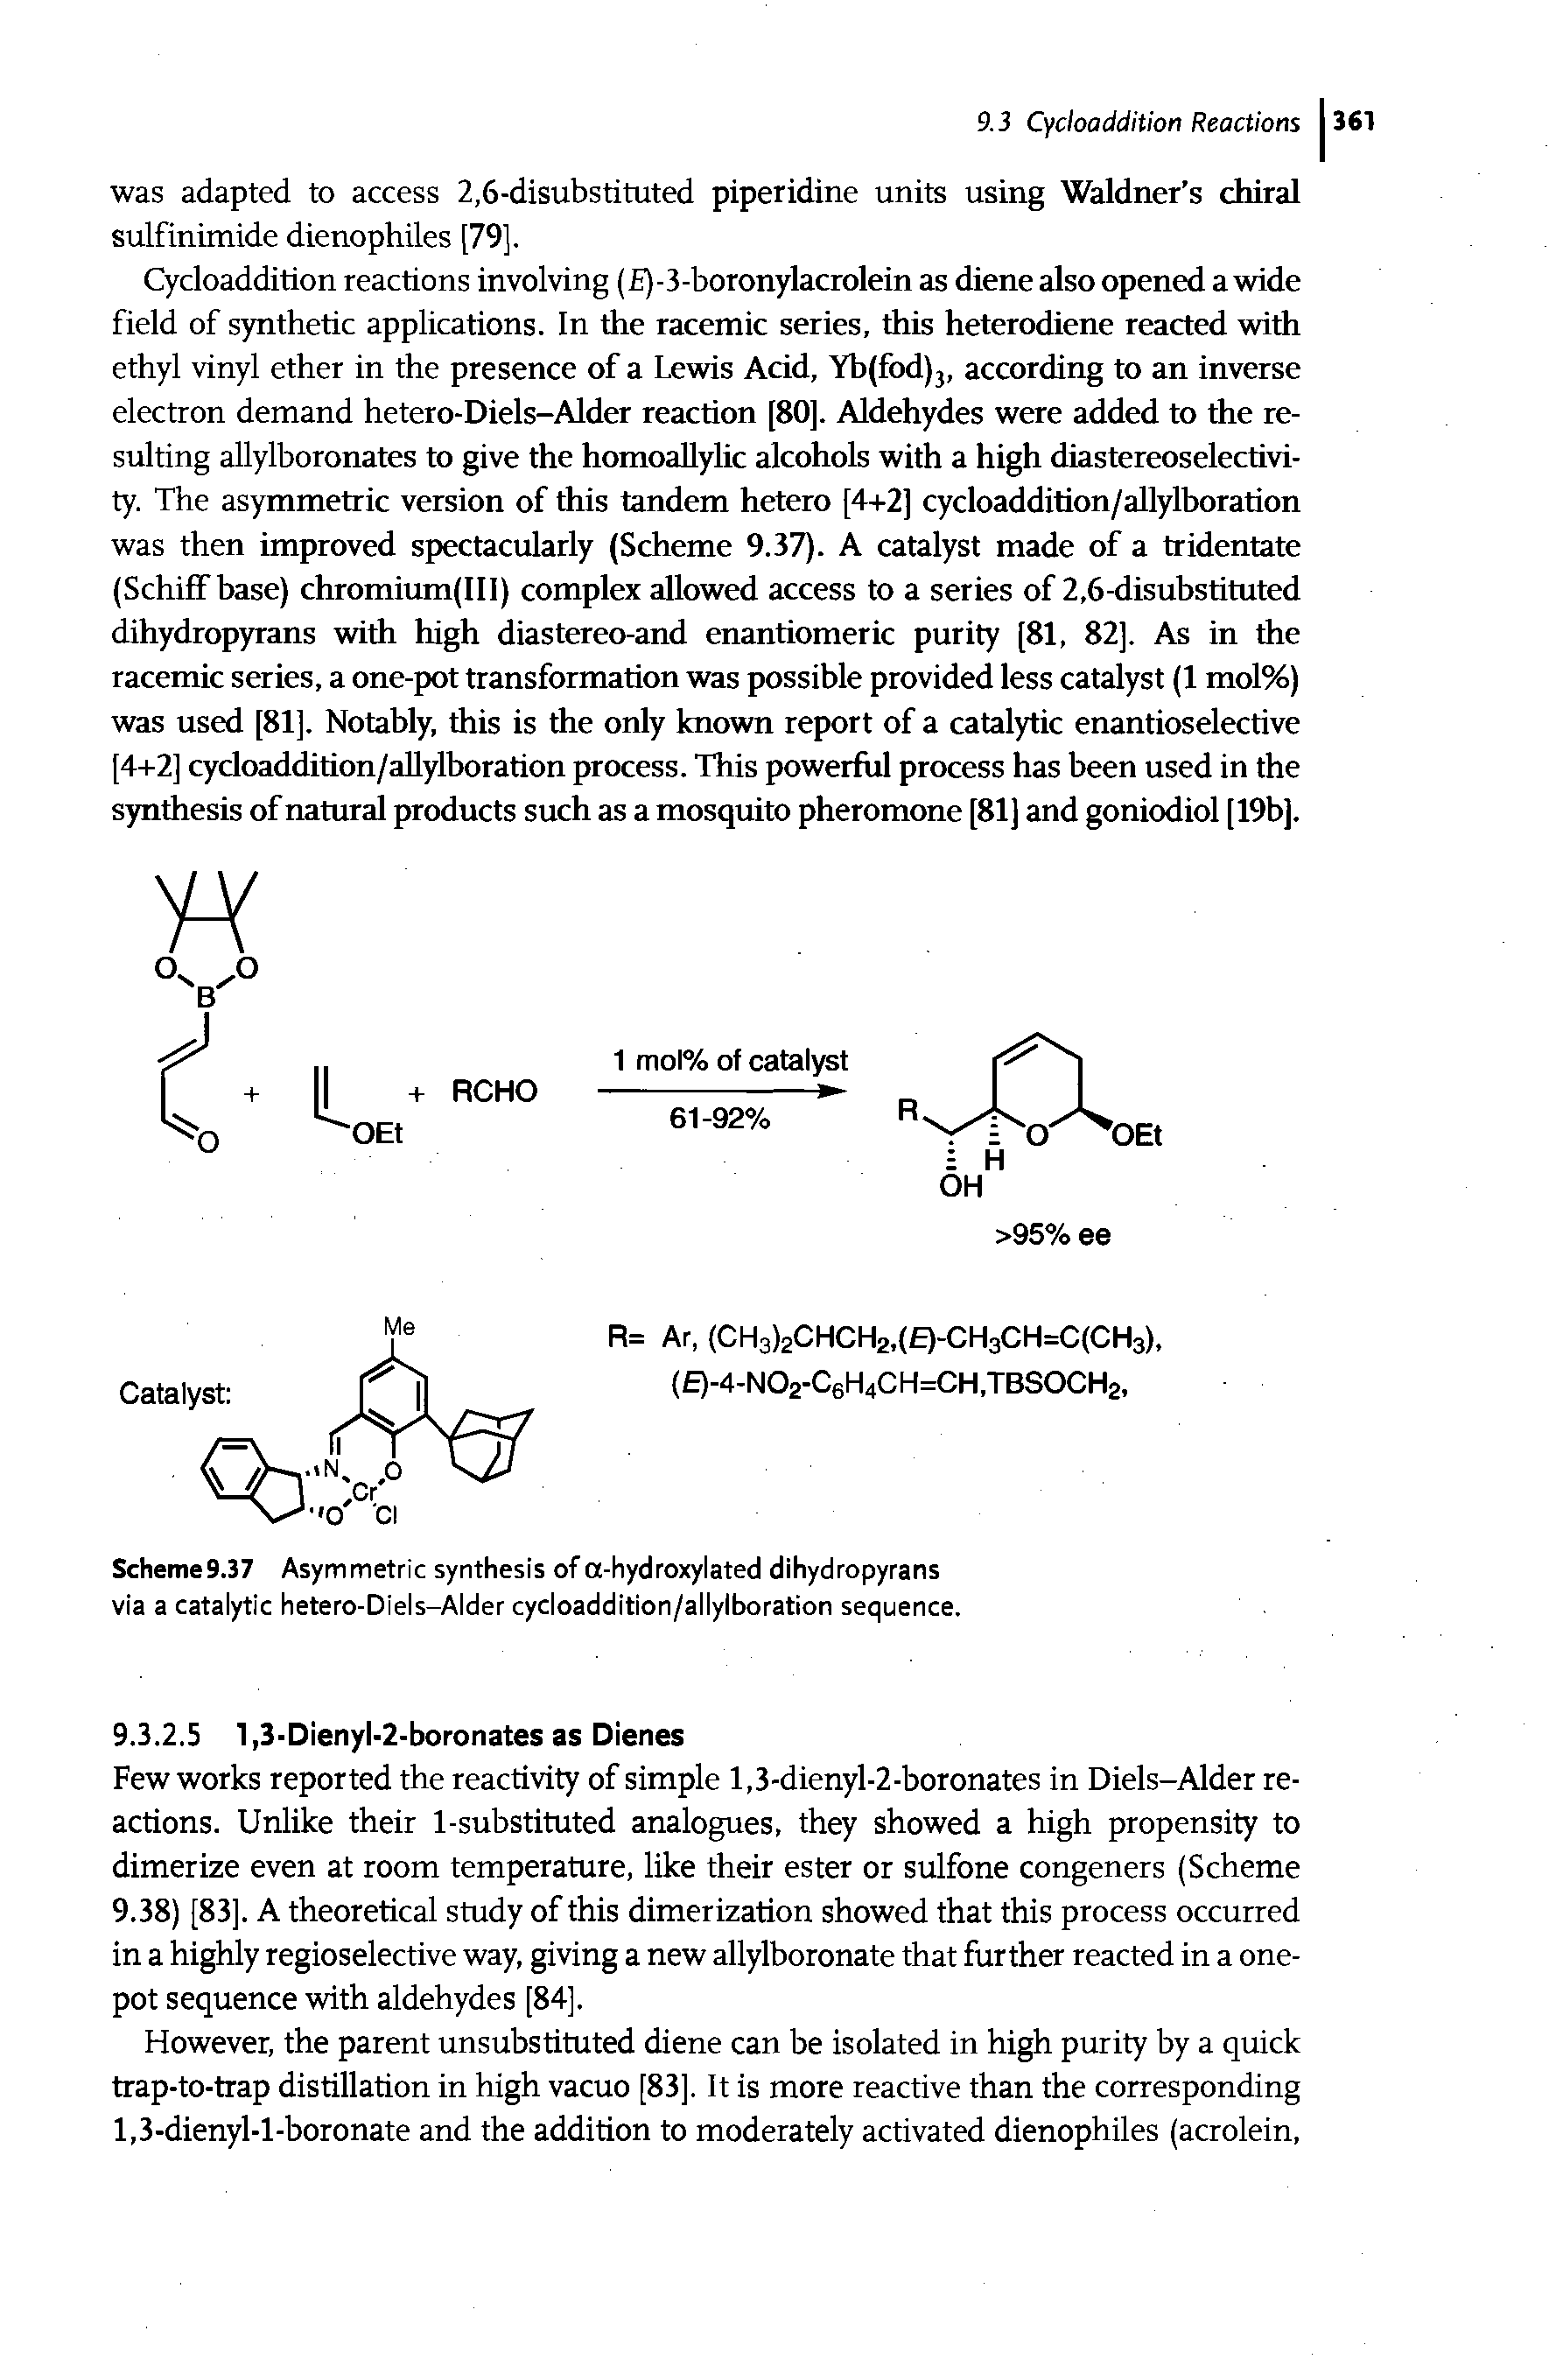 Scheme9.37 Asymmetric synthesis of a-hydroxylated dihydropyrans via a catalytic hetero-Diels-Alder cycloaddition/allylboration sequence.